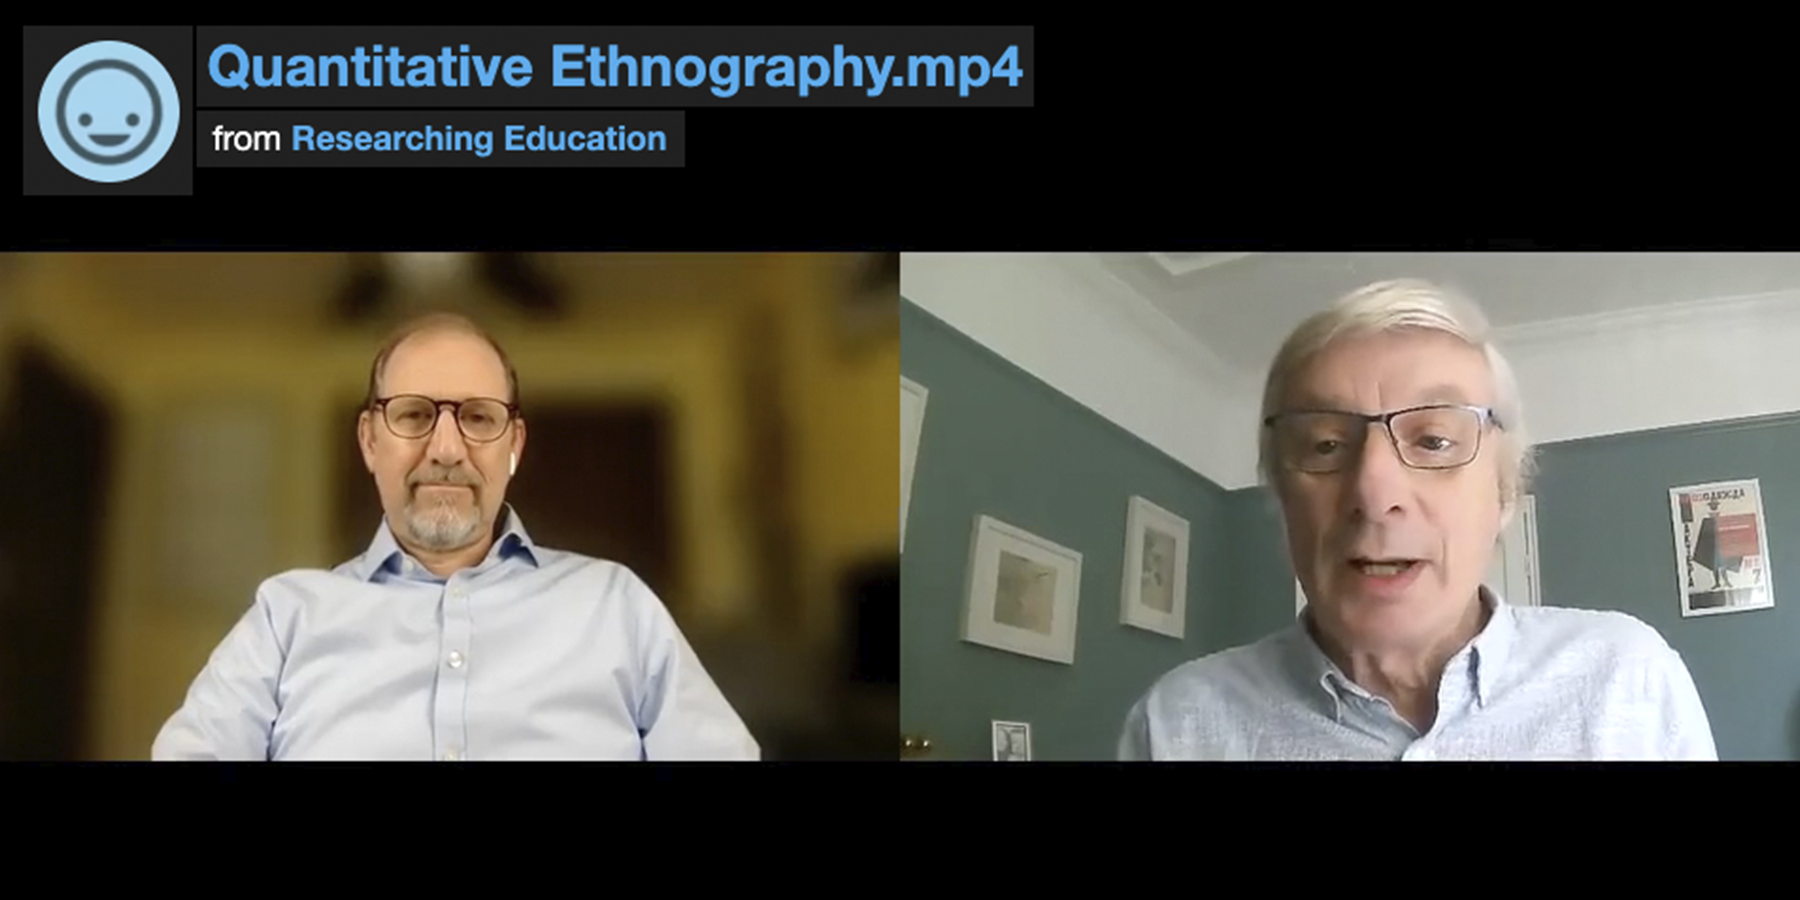 Conversation: ‘Quantitative Ethnography’ - a perspective on educational research methods